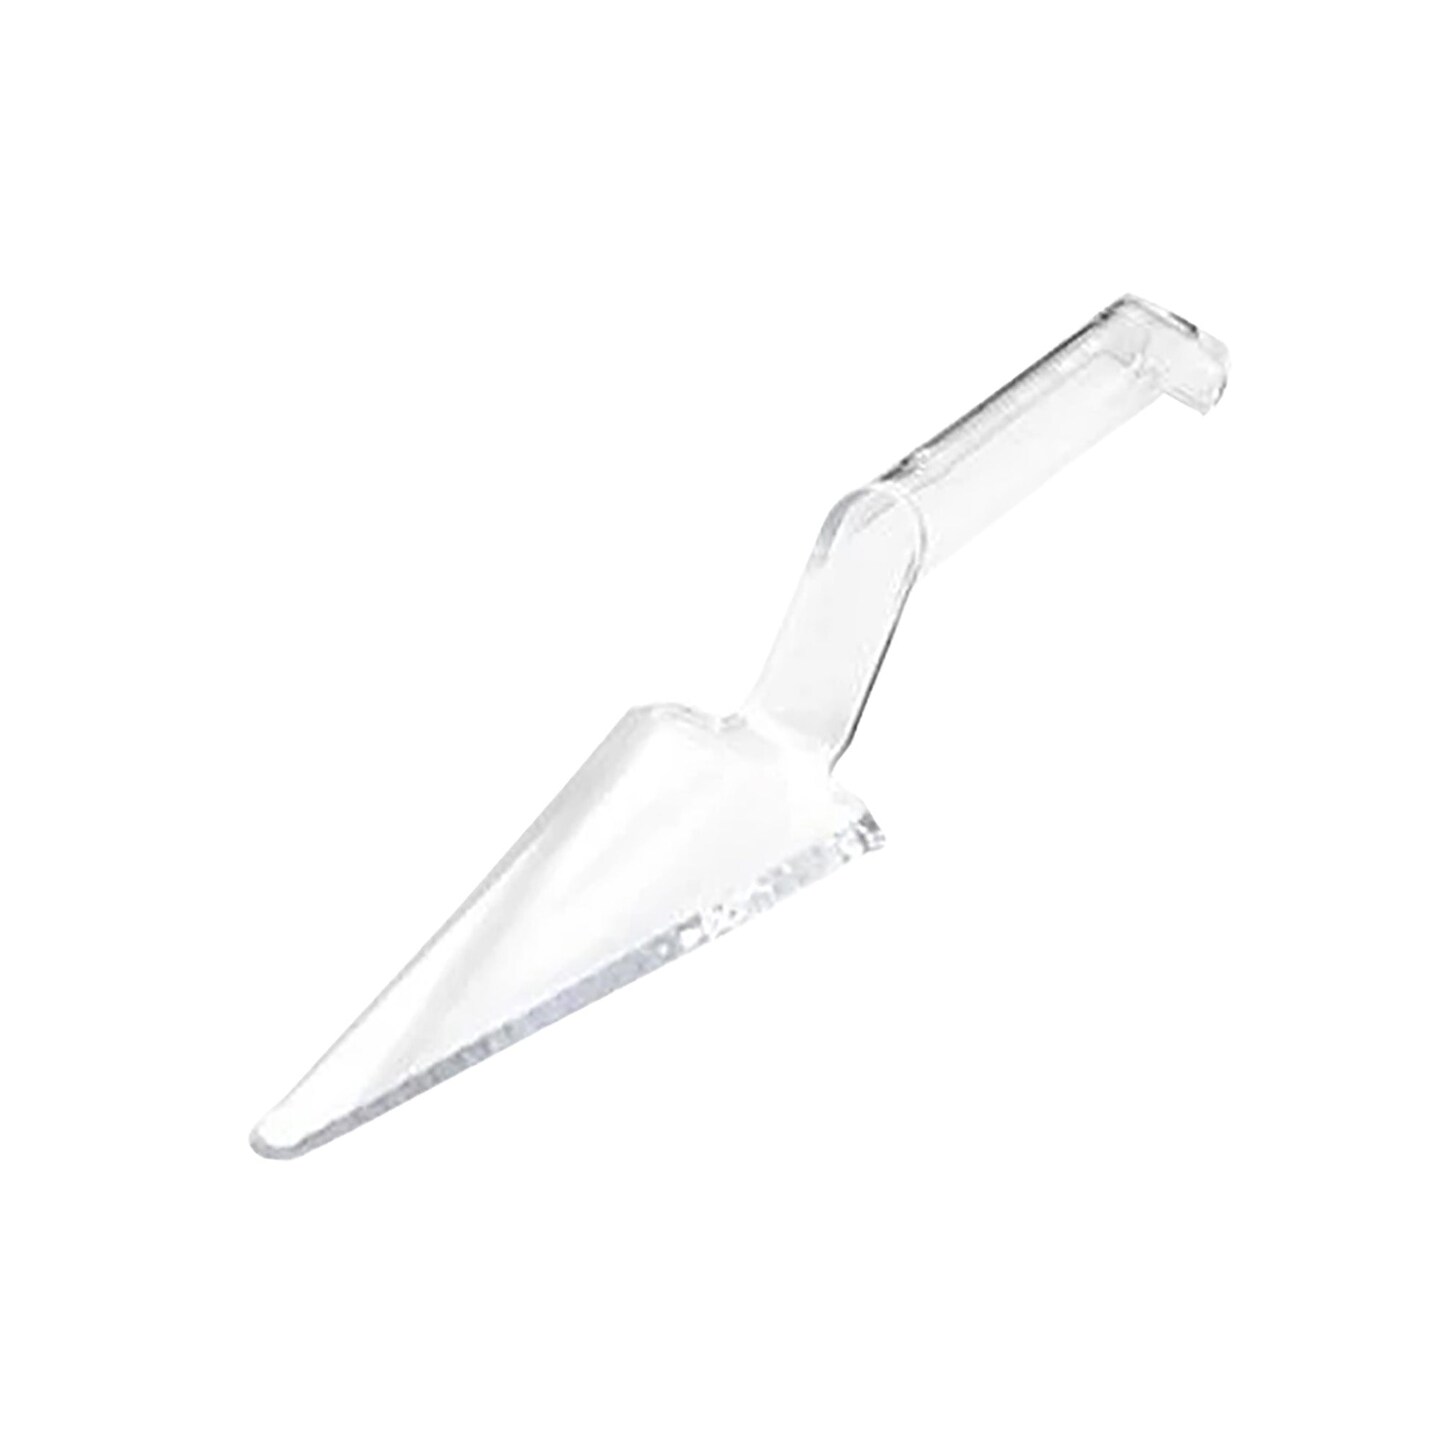 Clear Disposable Plastic Cake Cutter/Lifter (60 Cake Cutters)